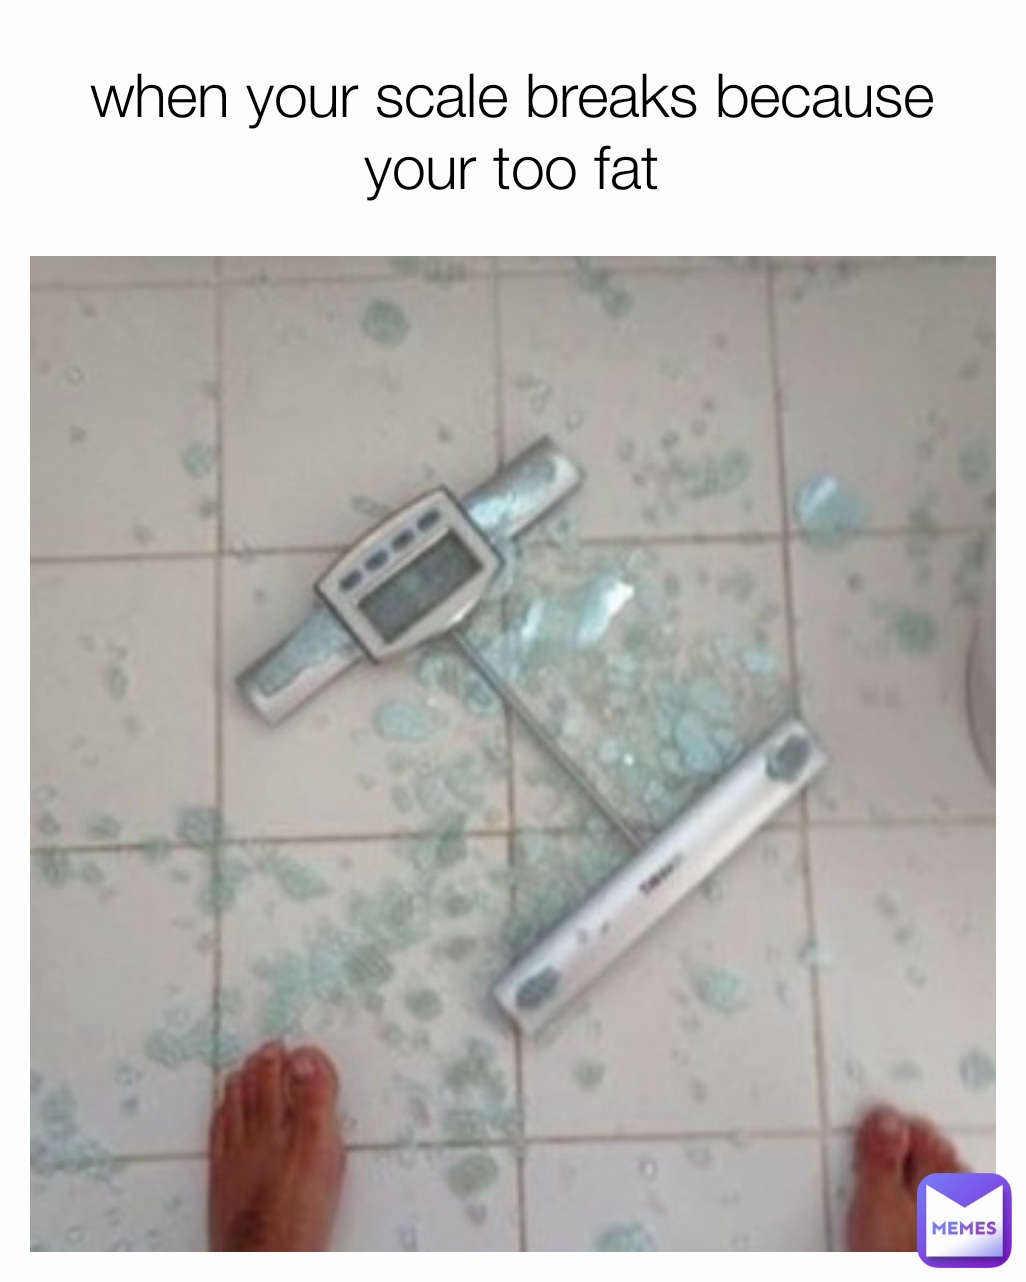 when your scale breaks because your too fat